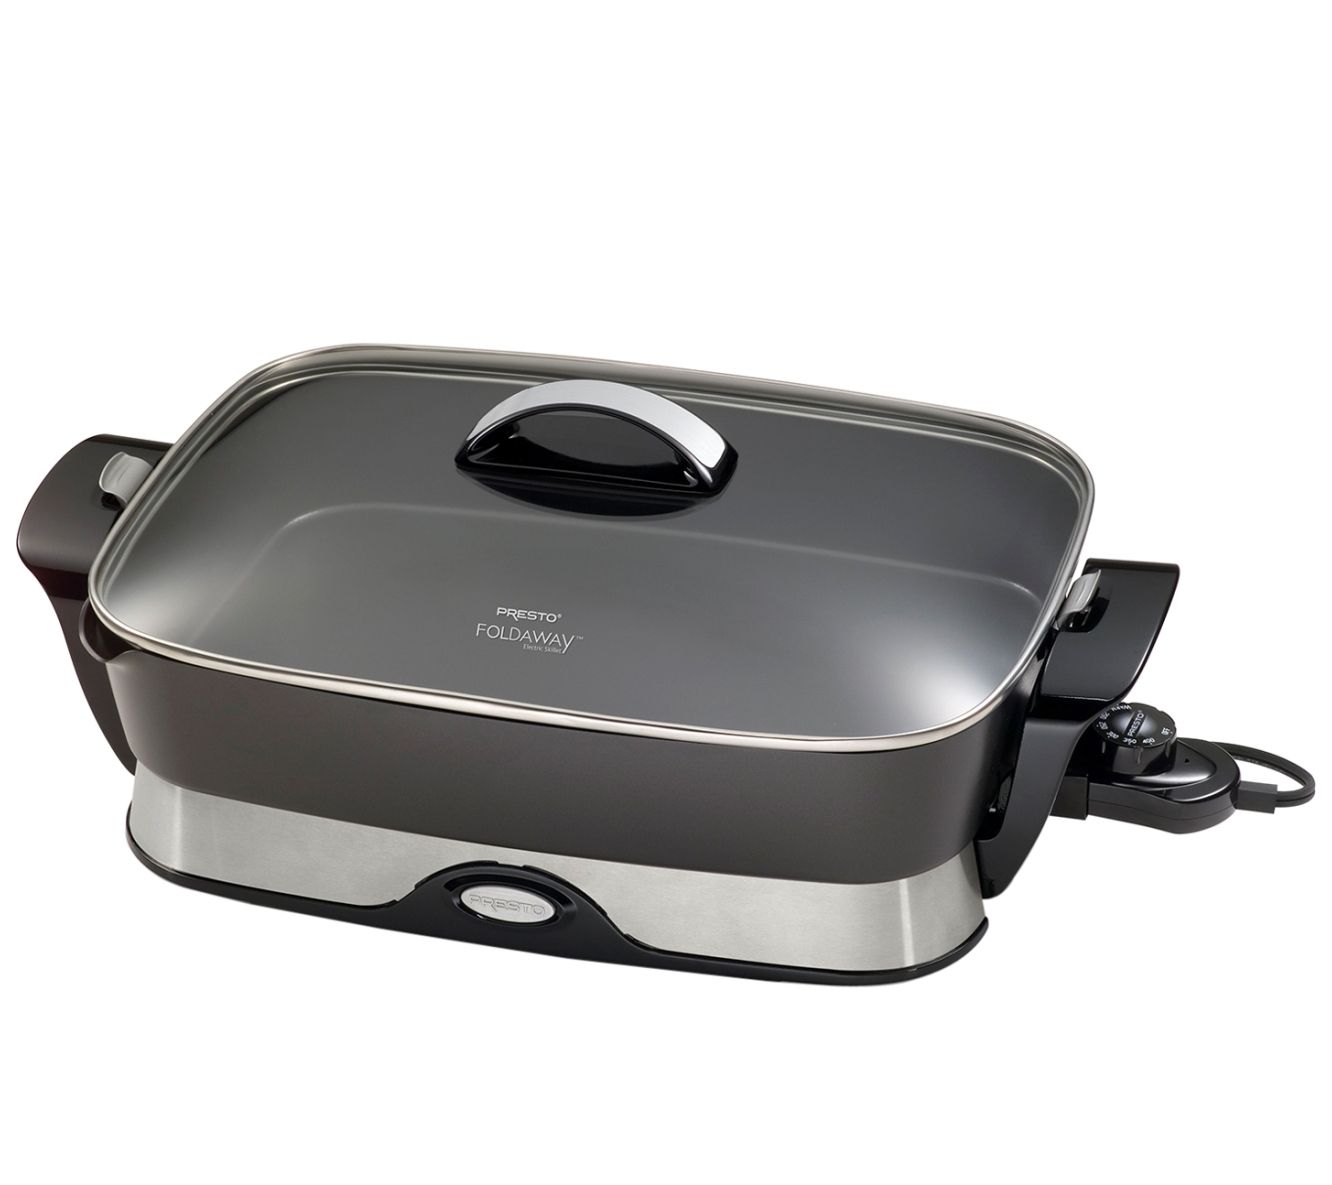 16-inch Electric Skillet with glass cover - Skillets - Presto®